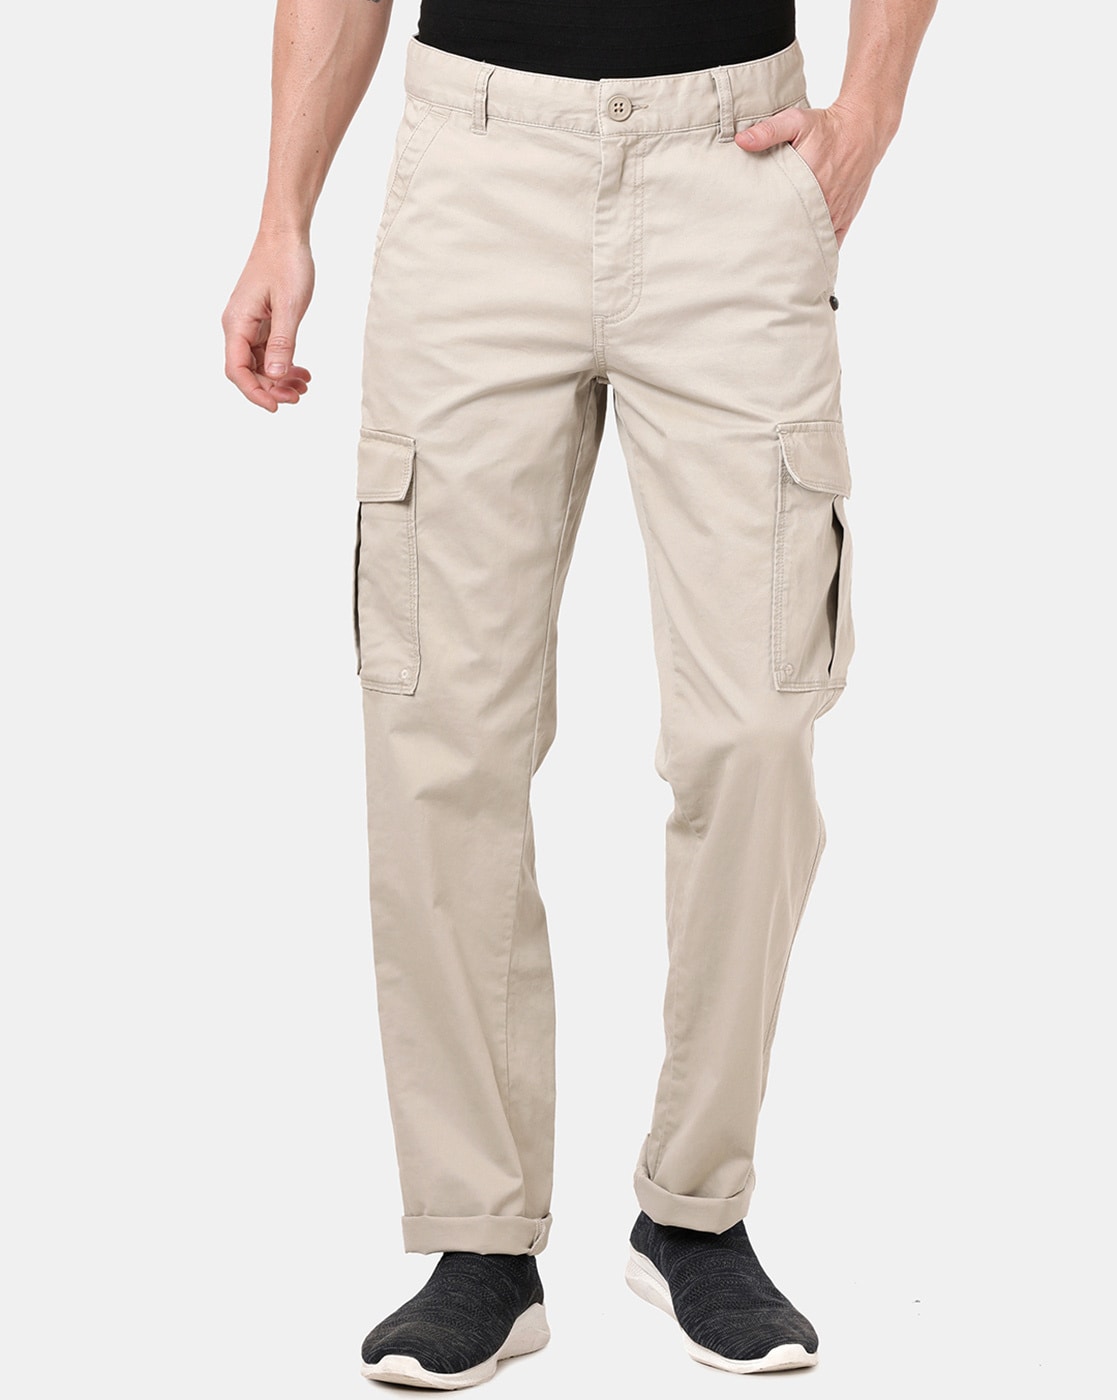 Buy t-base Men's Beige Slim Tapered Chinos -Trousers for Mens at Amazon.in